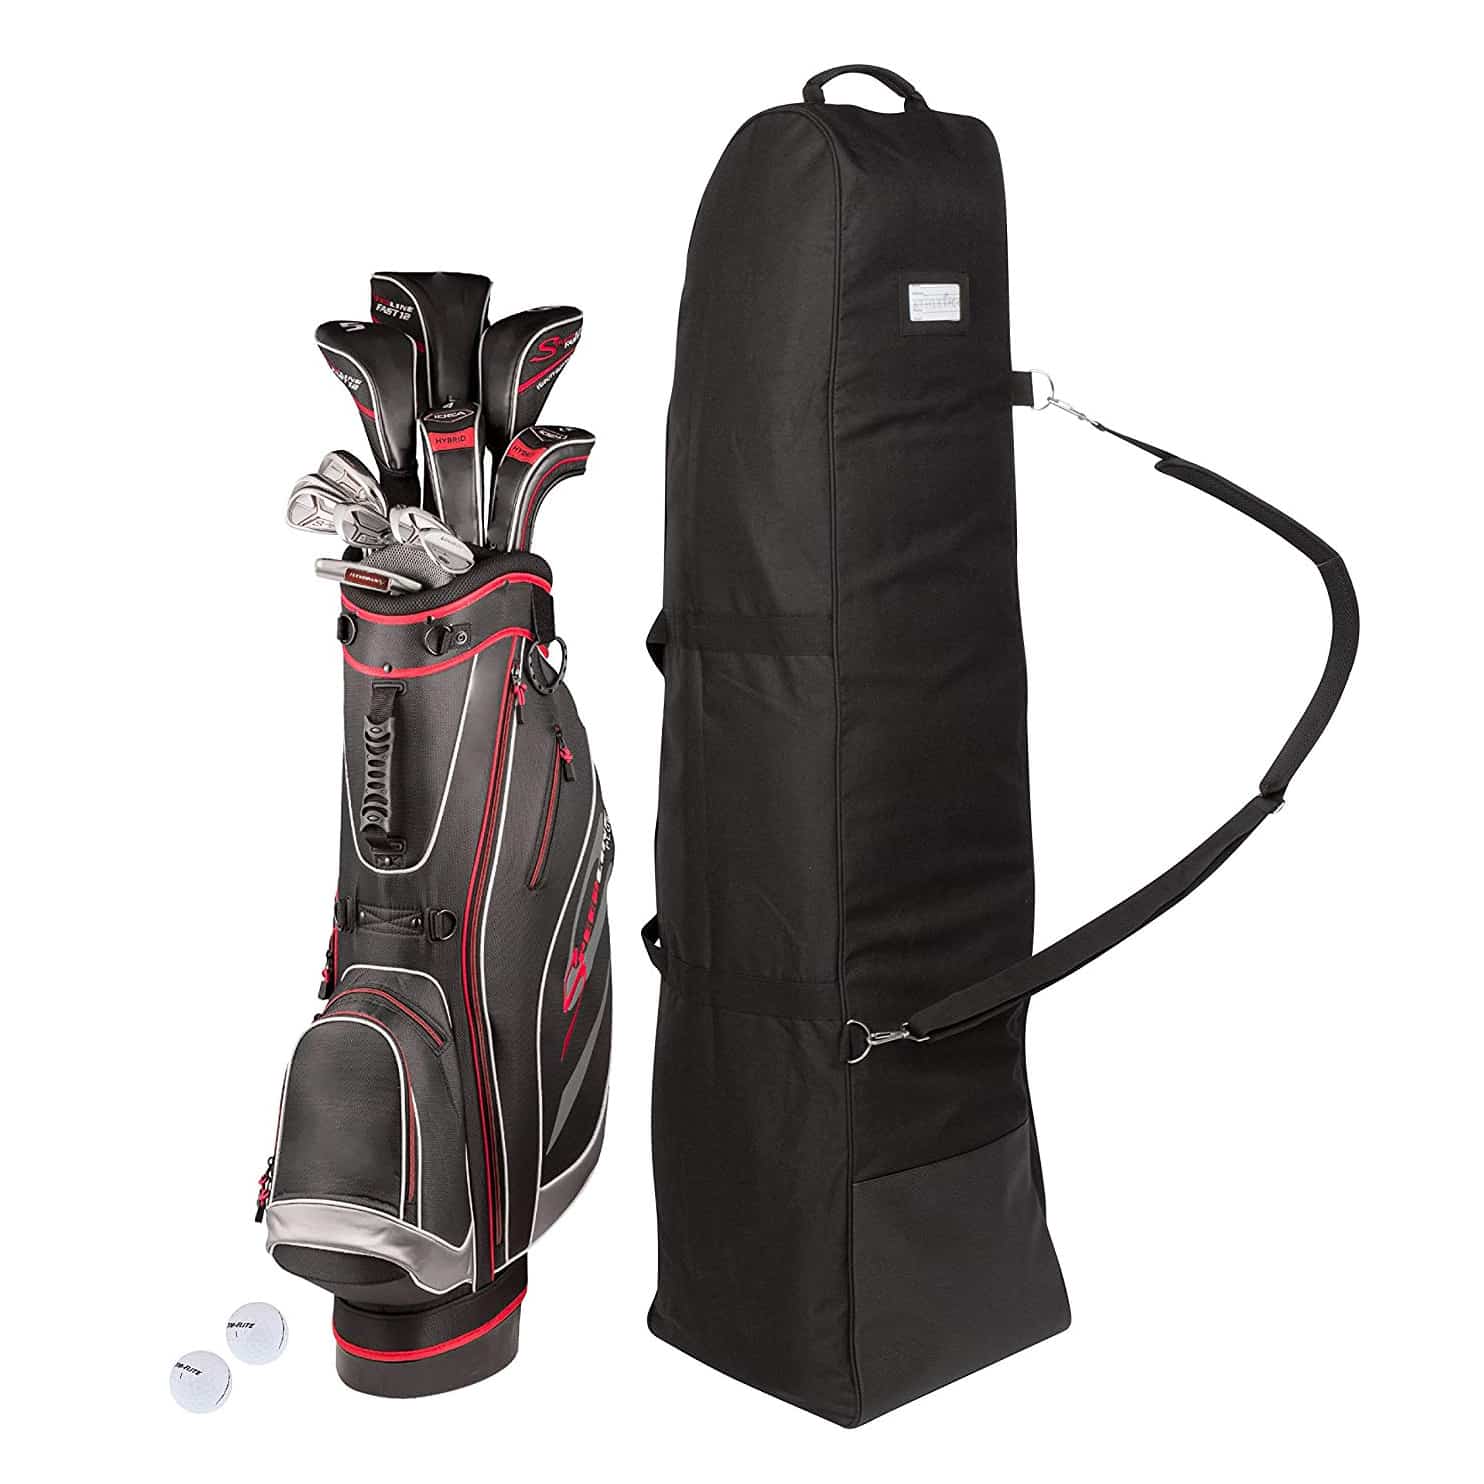 travel size golf bags